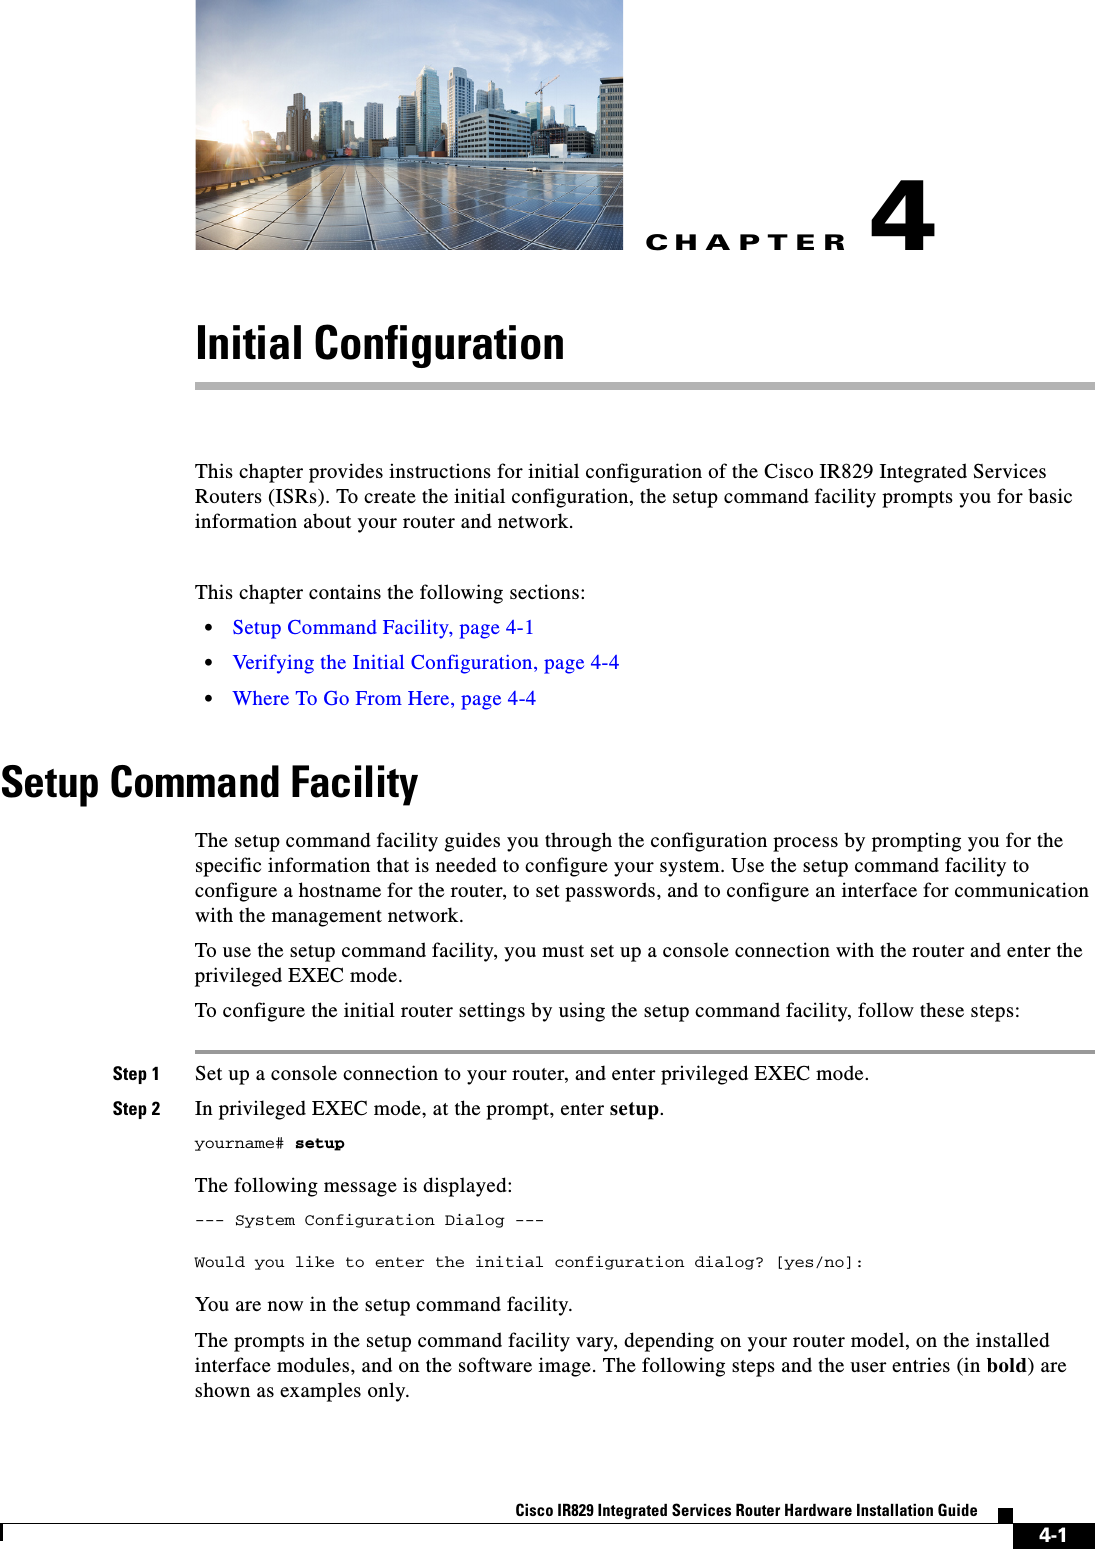 CHAPTER4-1Cisco IR829 Integrated Services Router Hardware Installation Guide4Initial ConfigurationThis chapter provides instructions for initial configuration of the Cisco IR829 Integrated Services Routers (ISRs). To create the initial configuration, the setup command facility prompts you for basic information about your router and network.This chapter contains the following sections:  • Setup Command Facility, page 4-1  • Verifying the Initial Configuration, page 4-4  • Where To Go From Here, page 4-4Setup Command FacilityThe setup command facility guides you through the configuration process by prompting you for the specific information that is needed to configure your system. Use the setup command facility to configure a hostname for the router, to set passwords, and to configure an interface for communication with the management network.To use the setup command facility, you must set up a console connection with the router and enter the privileged EXEC mode. To configure the initial router settings by using the setup command facility, follow these steps:Step 1 Set up a console connection to your router, and enter privileged EXEC mode. Step 2 In privileged EXEC mode, at the prompt, enter setup. yourname# setupThe following message is displayed:--- System Configuration Dialog ---Would you like to enter the initial configuration dialog? [yes/no]:You are now in the setup command facility.The prompts in the setup command facility vary, depending on your router model, on the installed interface modules, and on the software image. The following steps and the user entries (in bold) are shown as examples only.